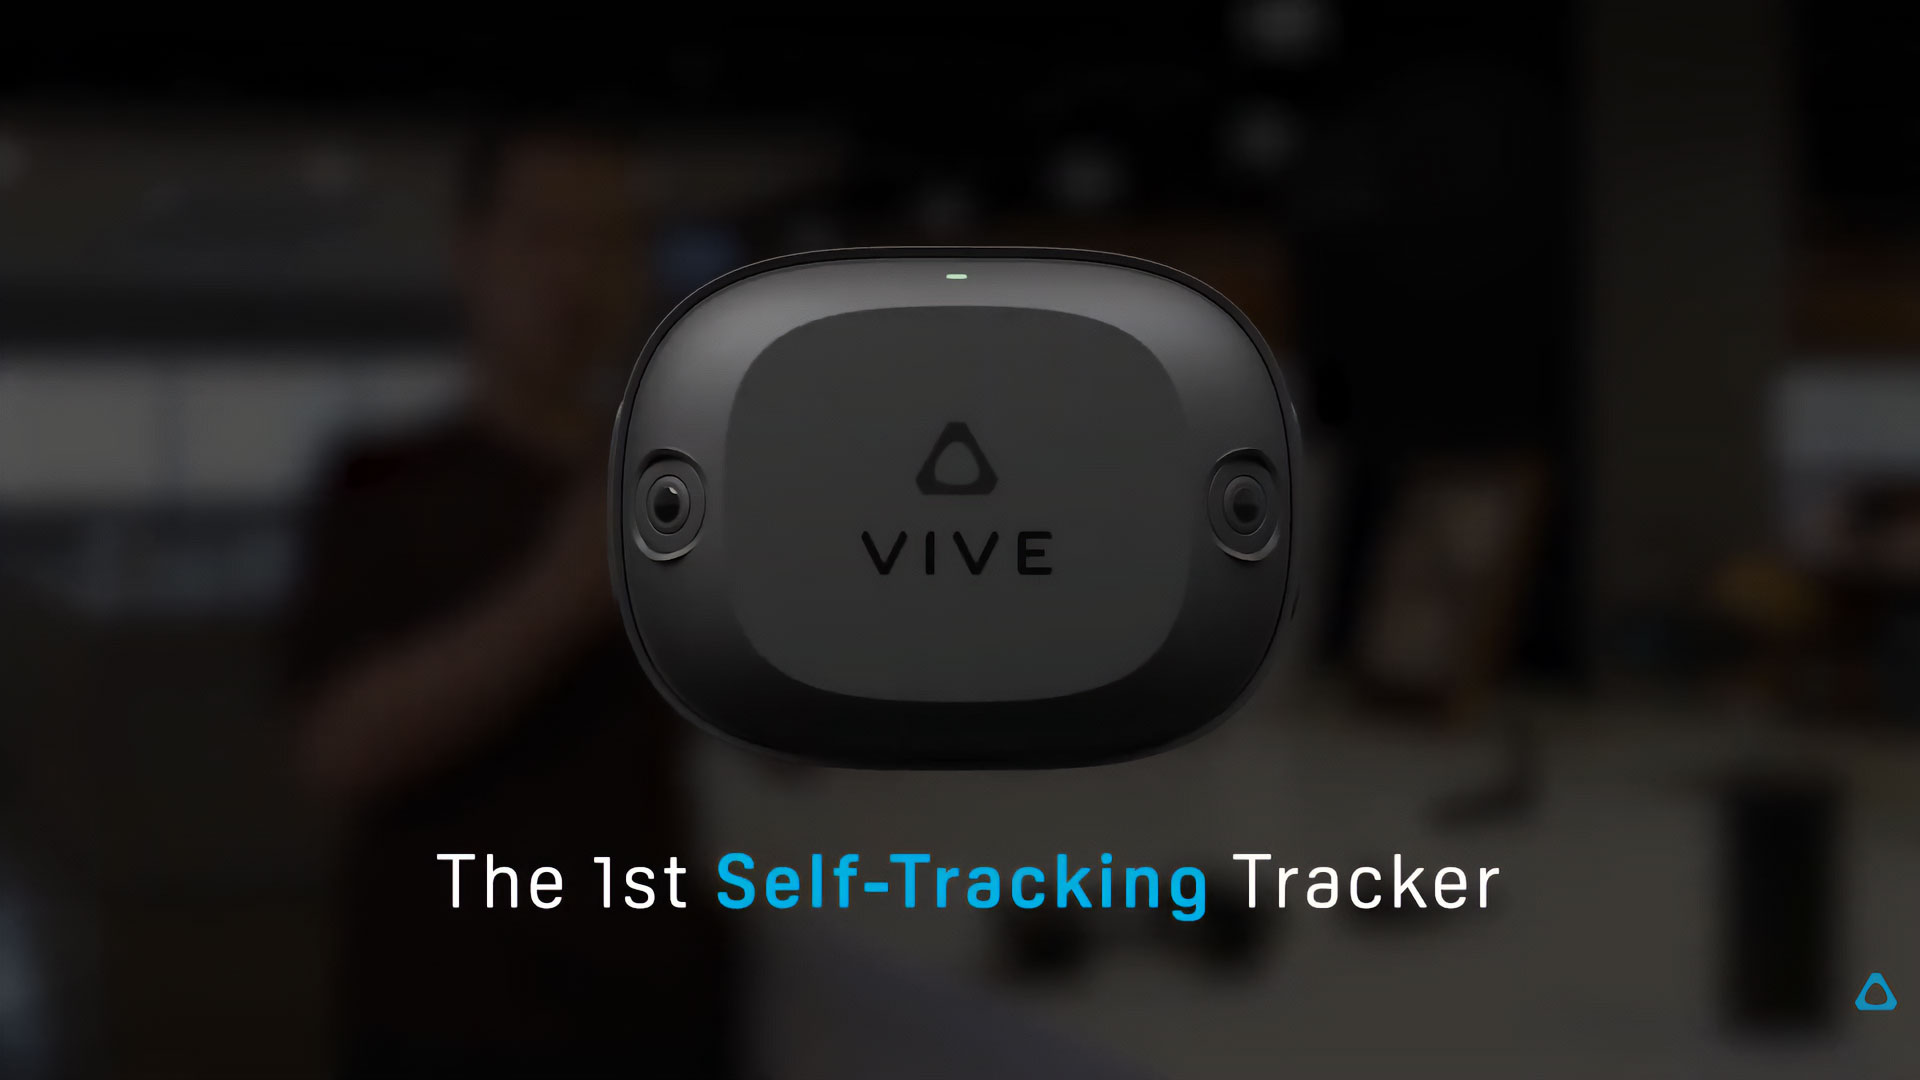 htc vive inside out tracker